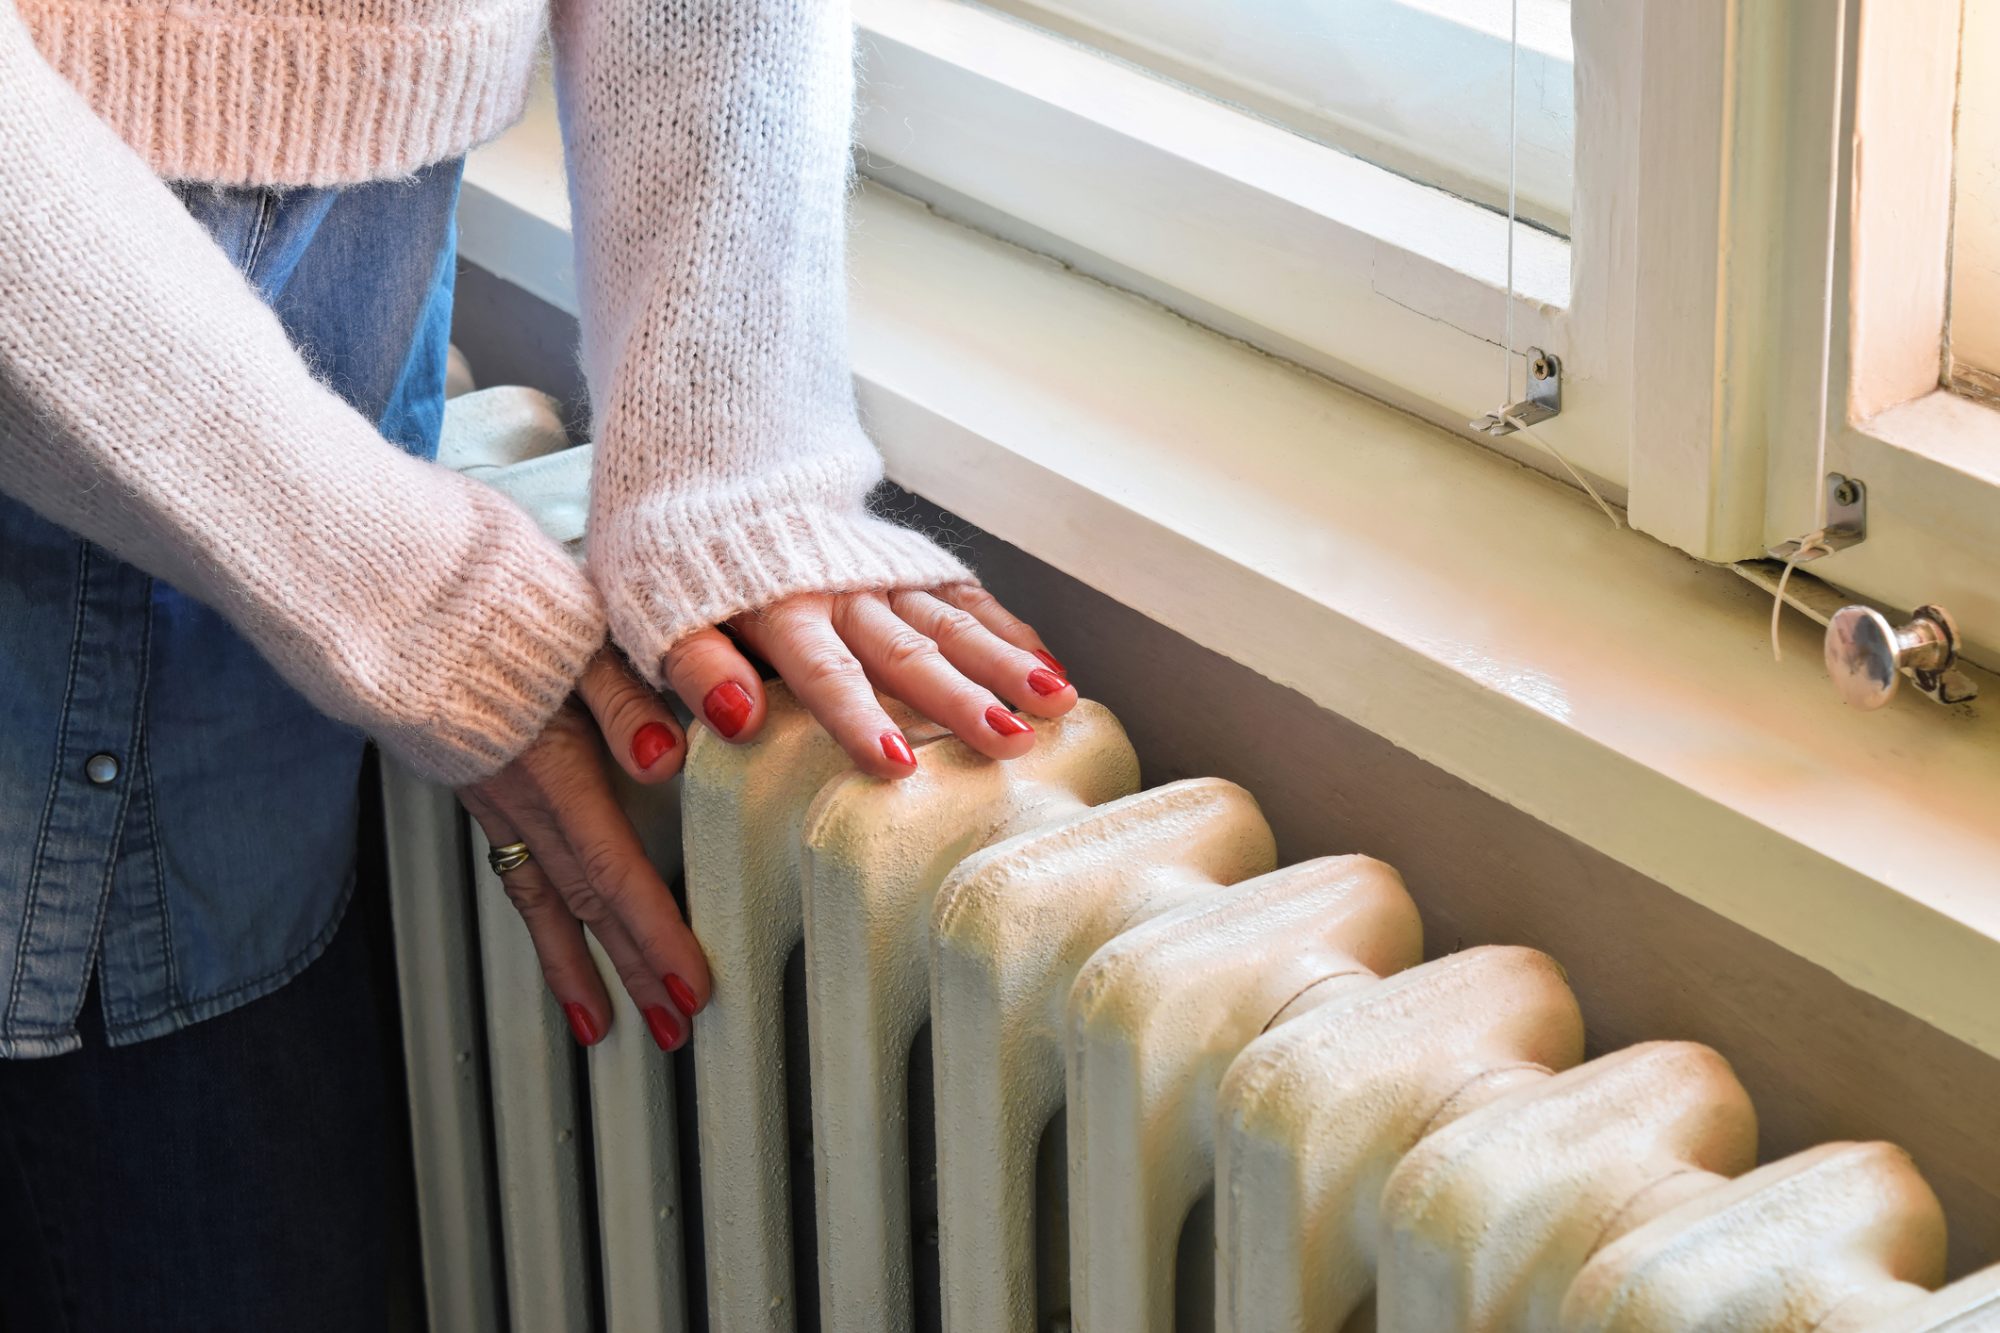 Home central heating system, woman`s hands on an old and robust metal radiator.